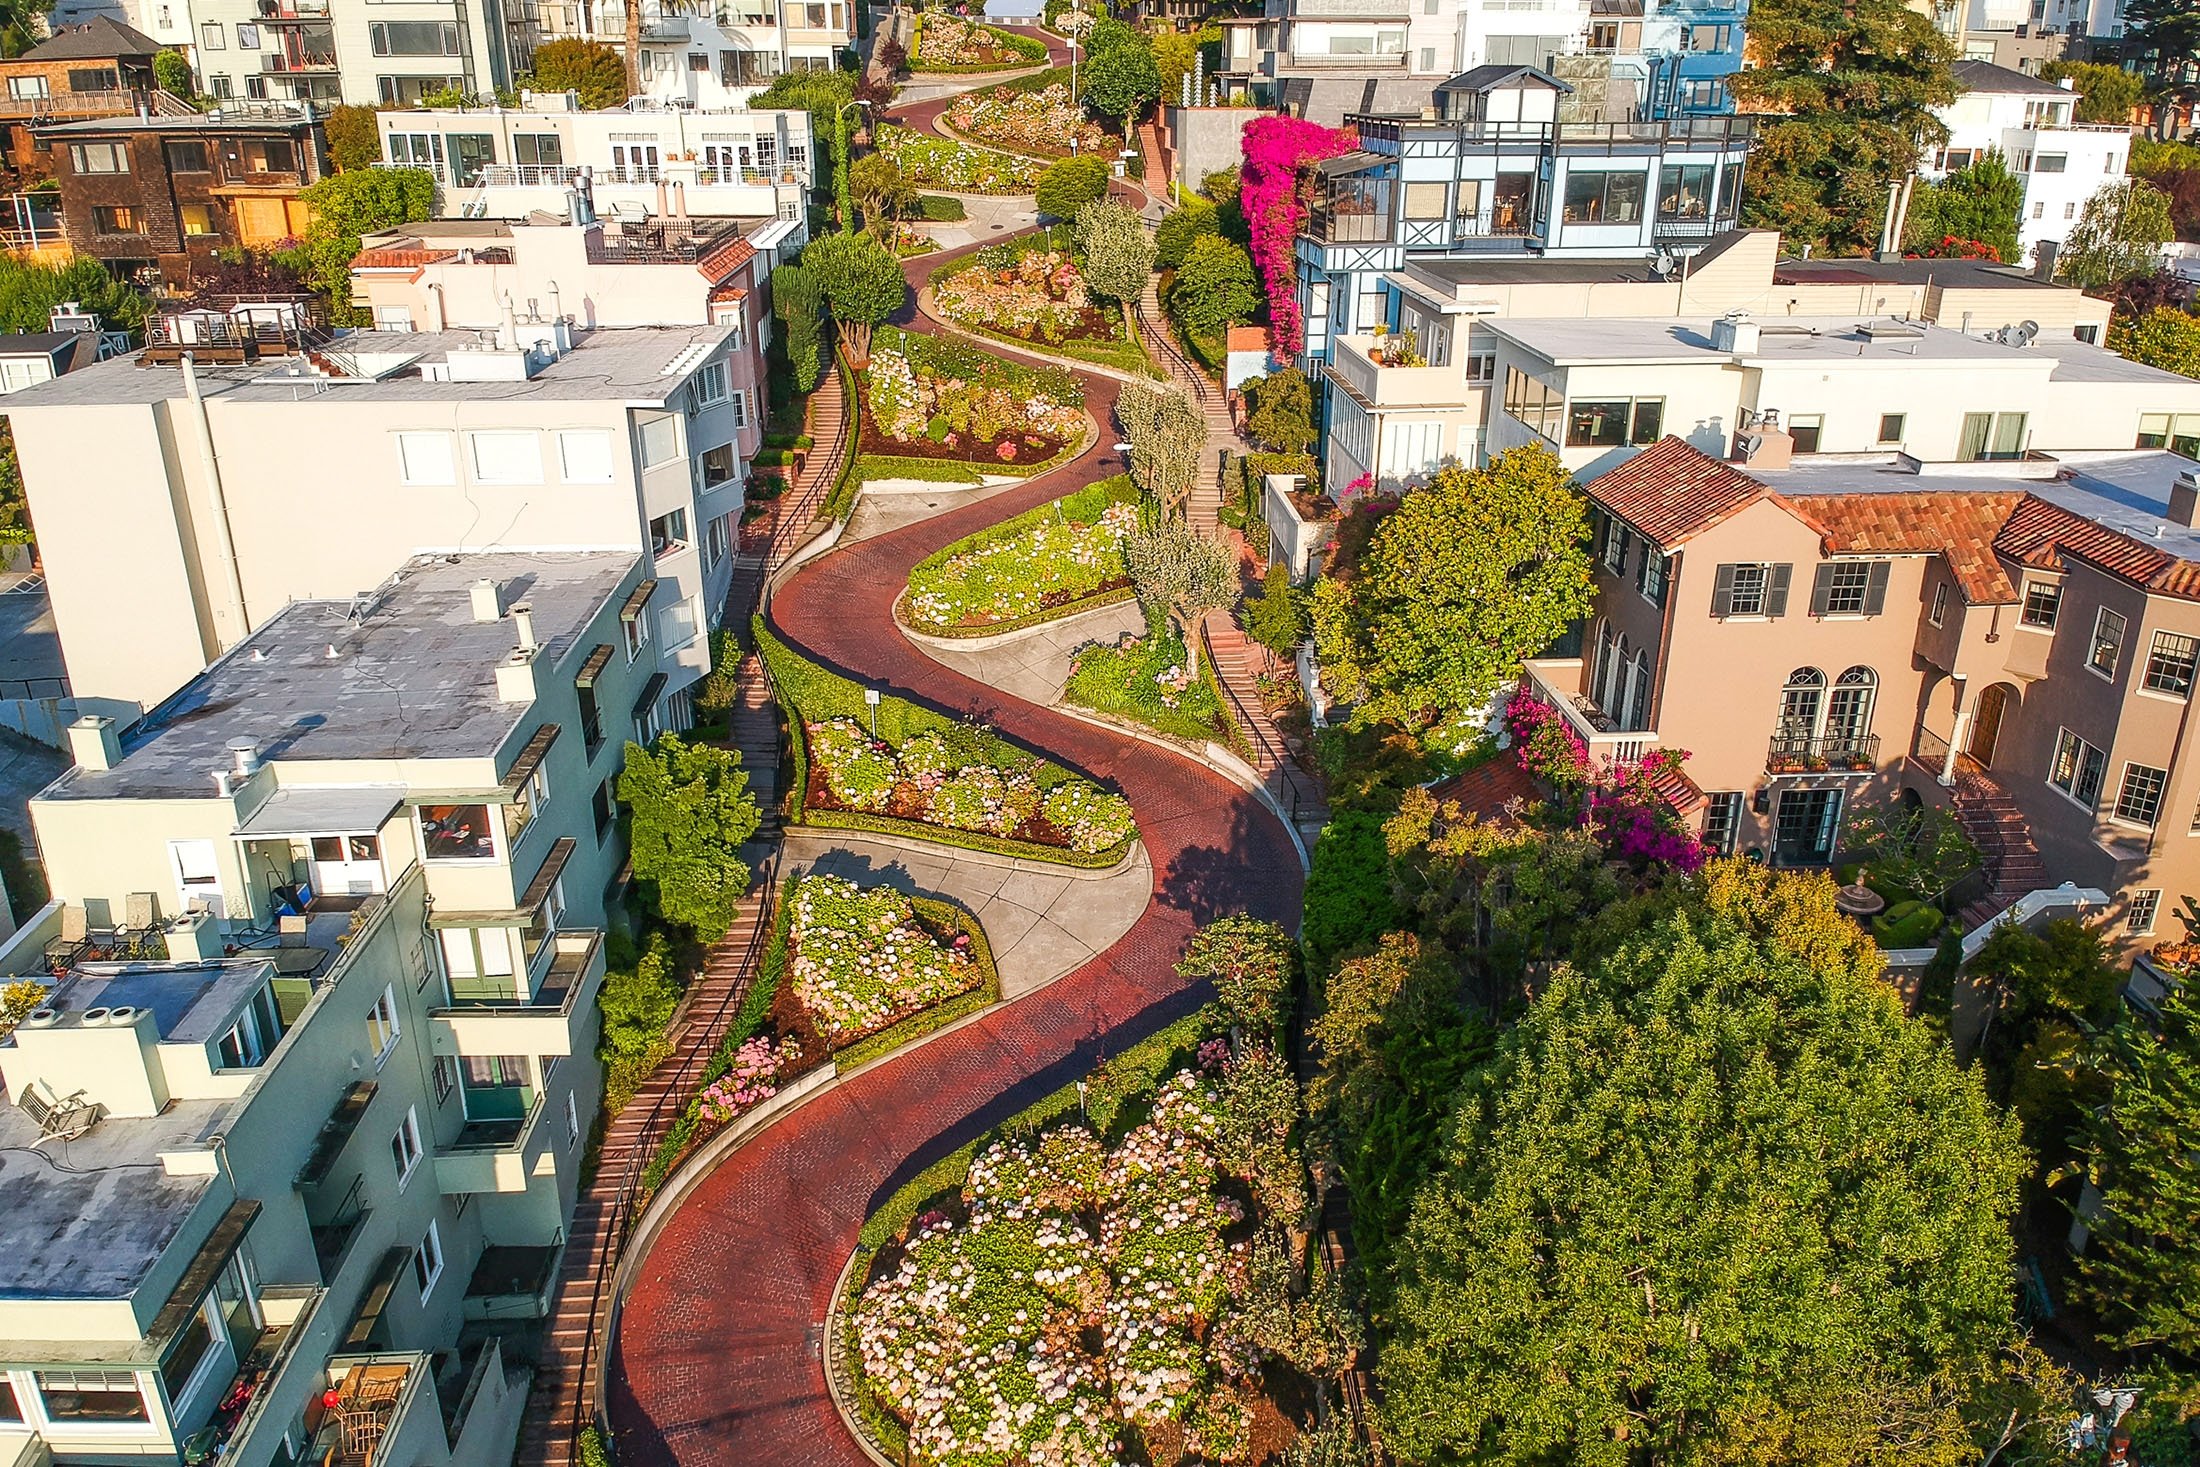 Lombard Street is a street in San Francisco, California, famous for its sharp bends. (Shutterstock Photo)